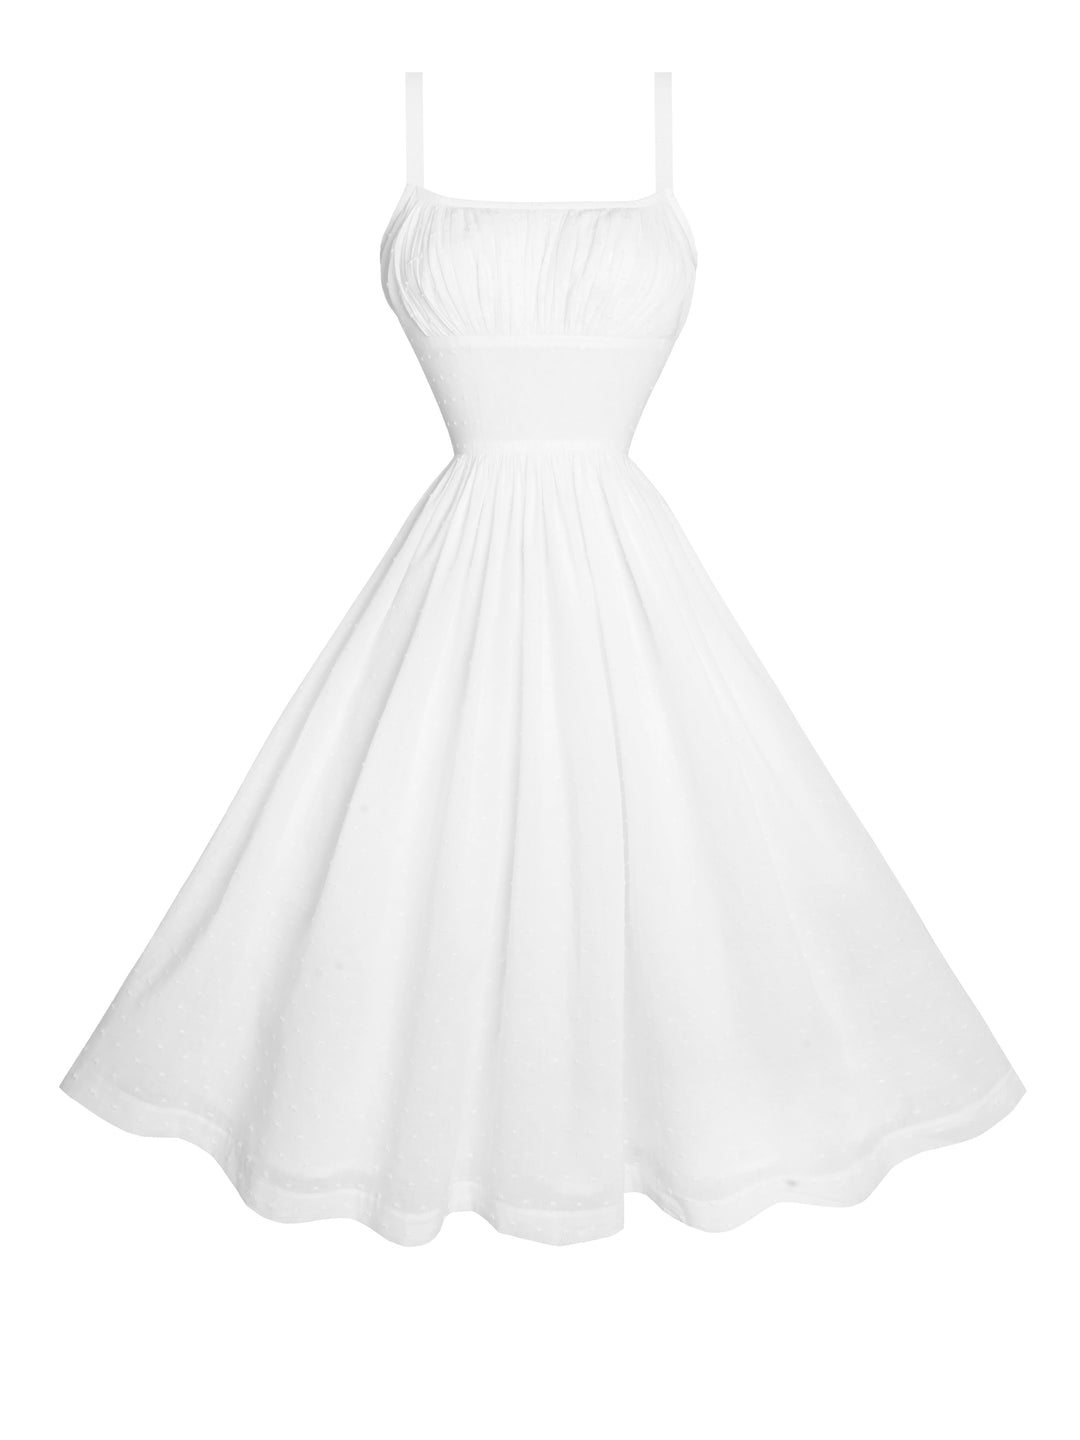 RTS - Grace Dress in White Cotton